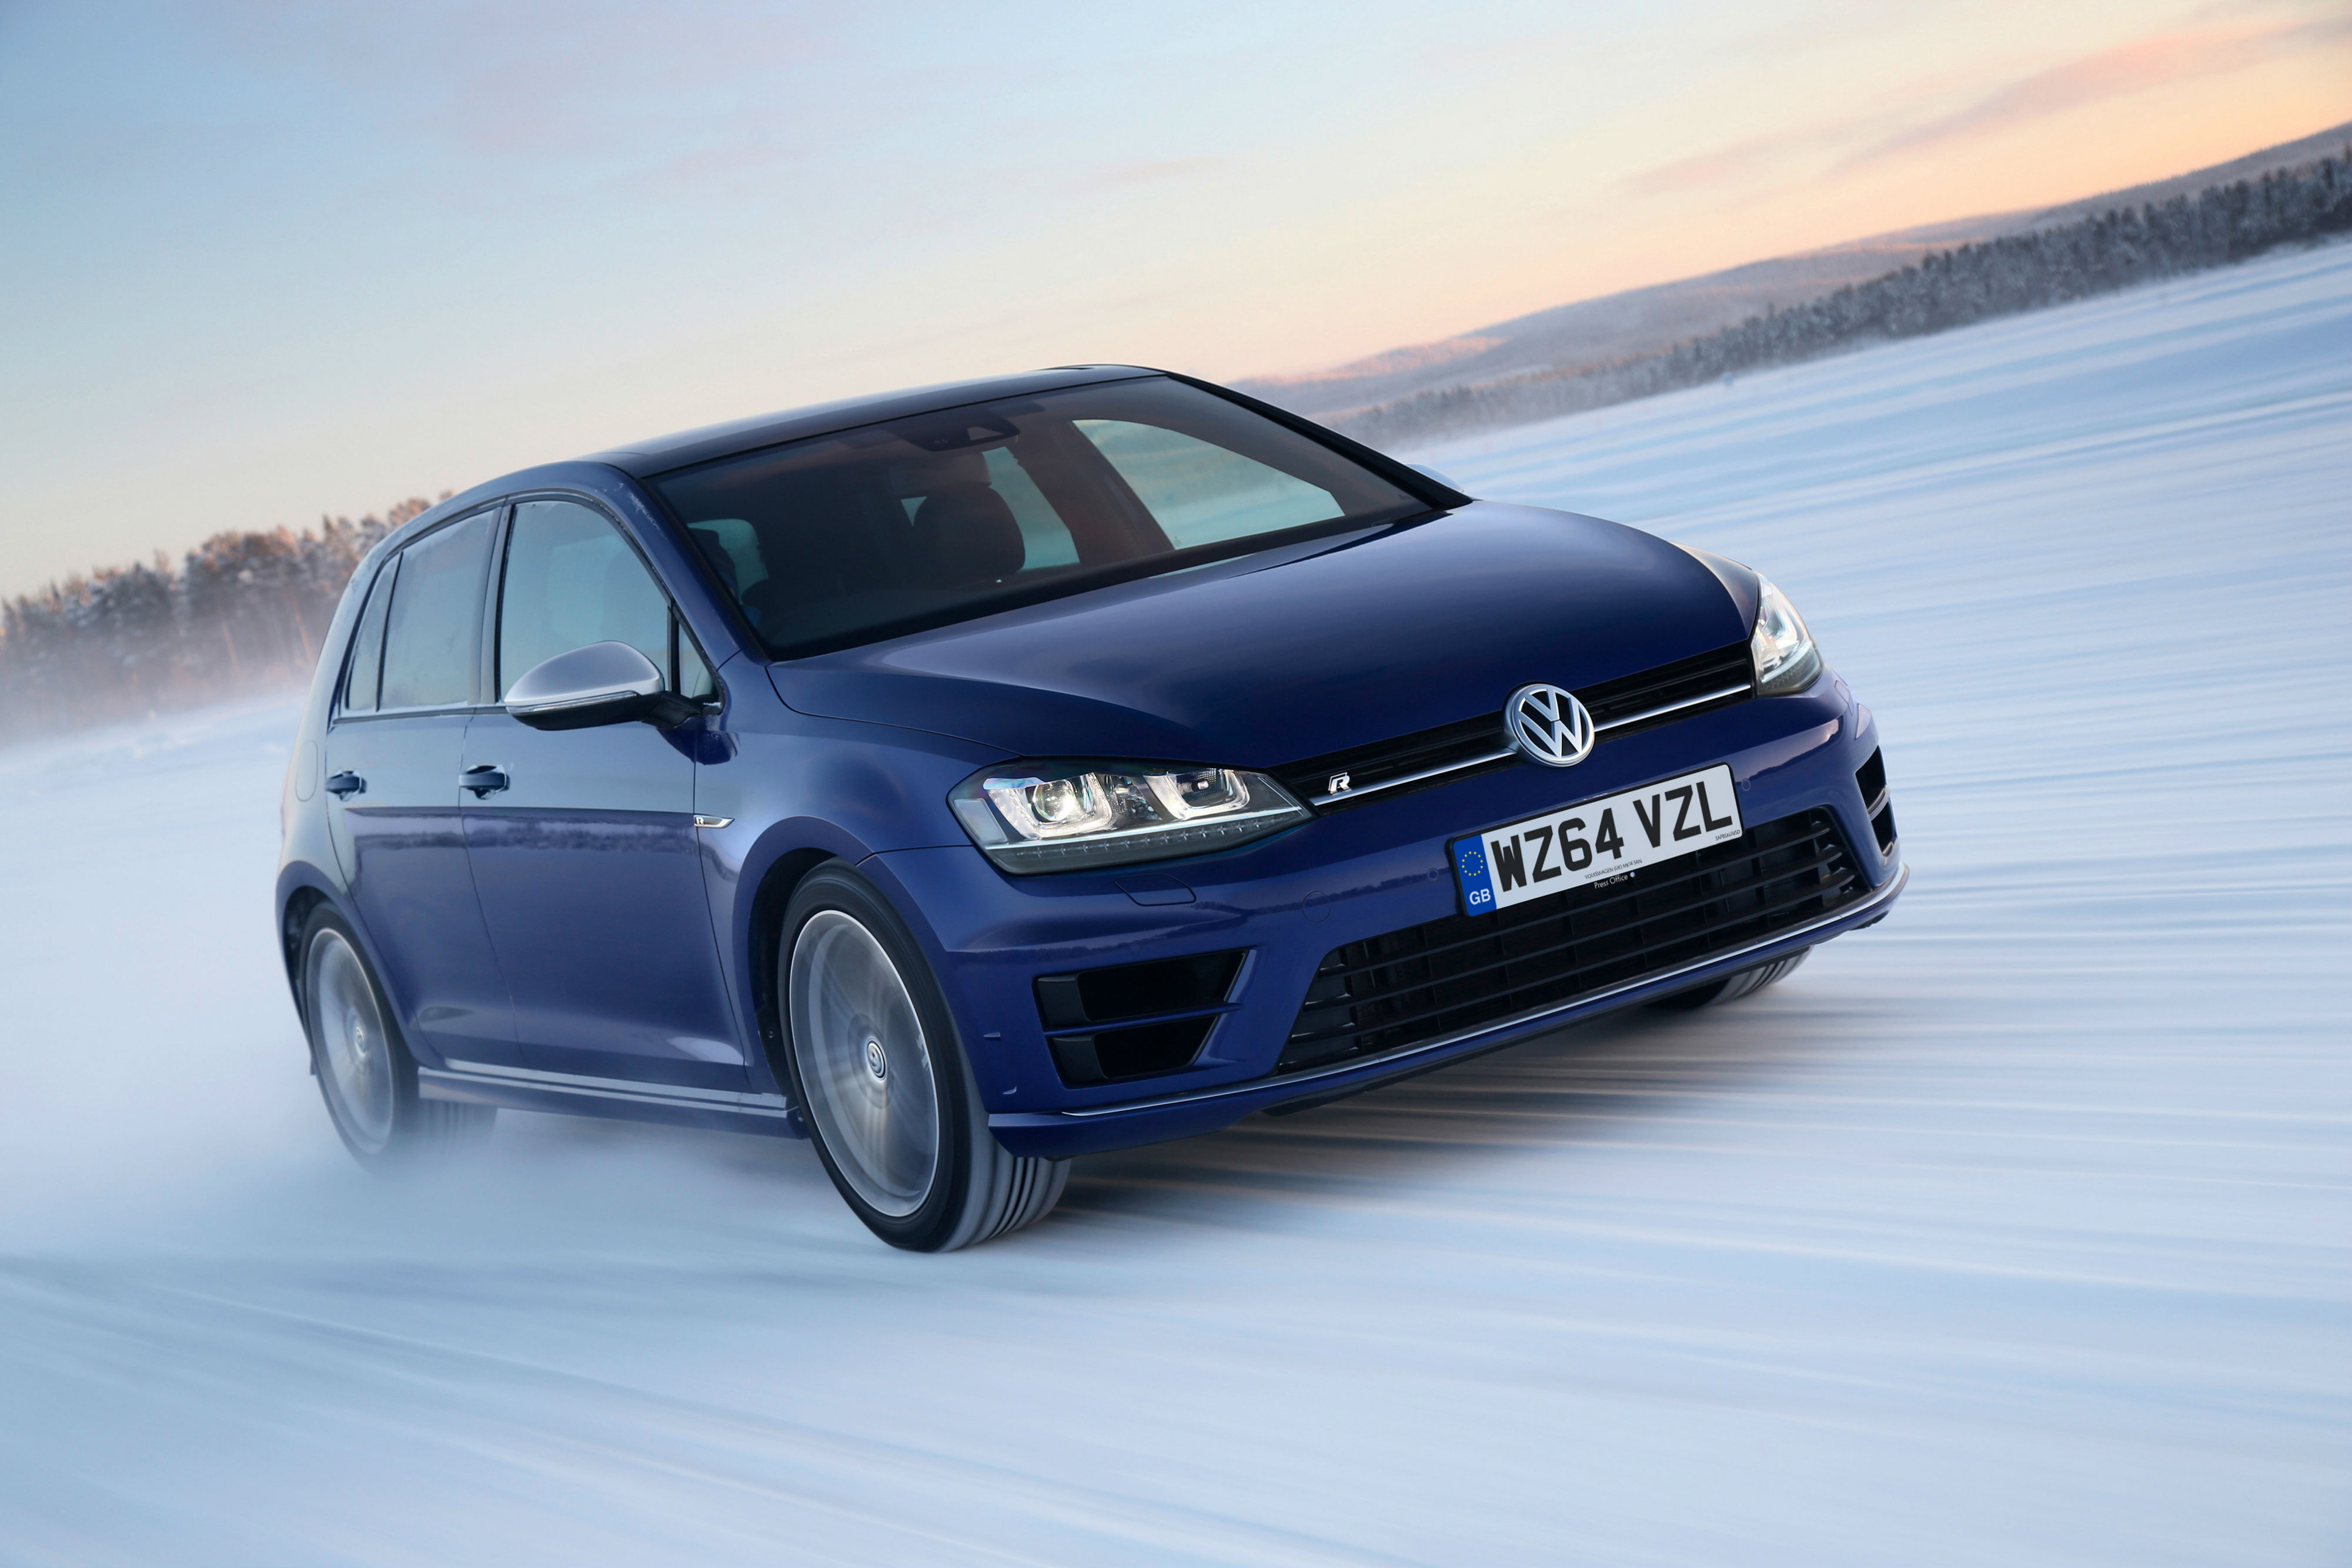 Volkswagen Golf R driving on snow-covered roads